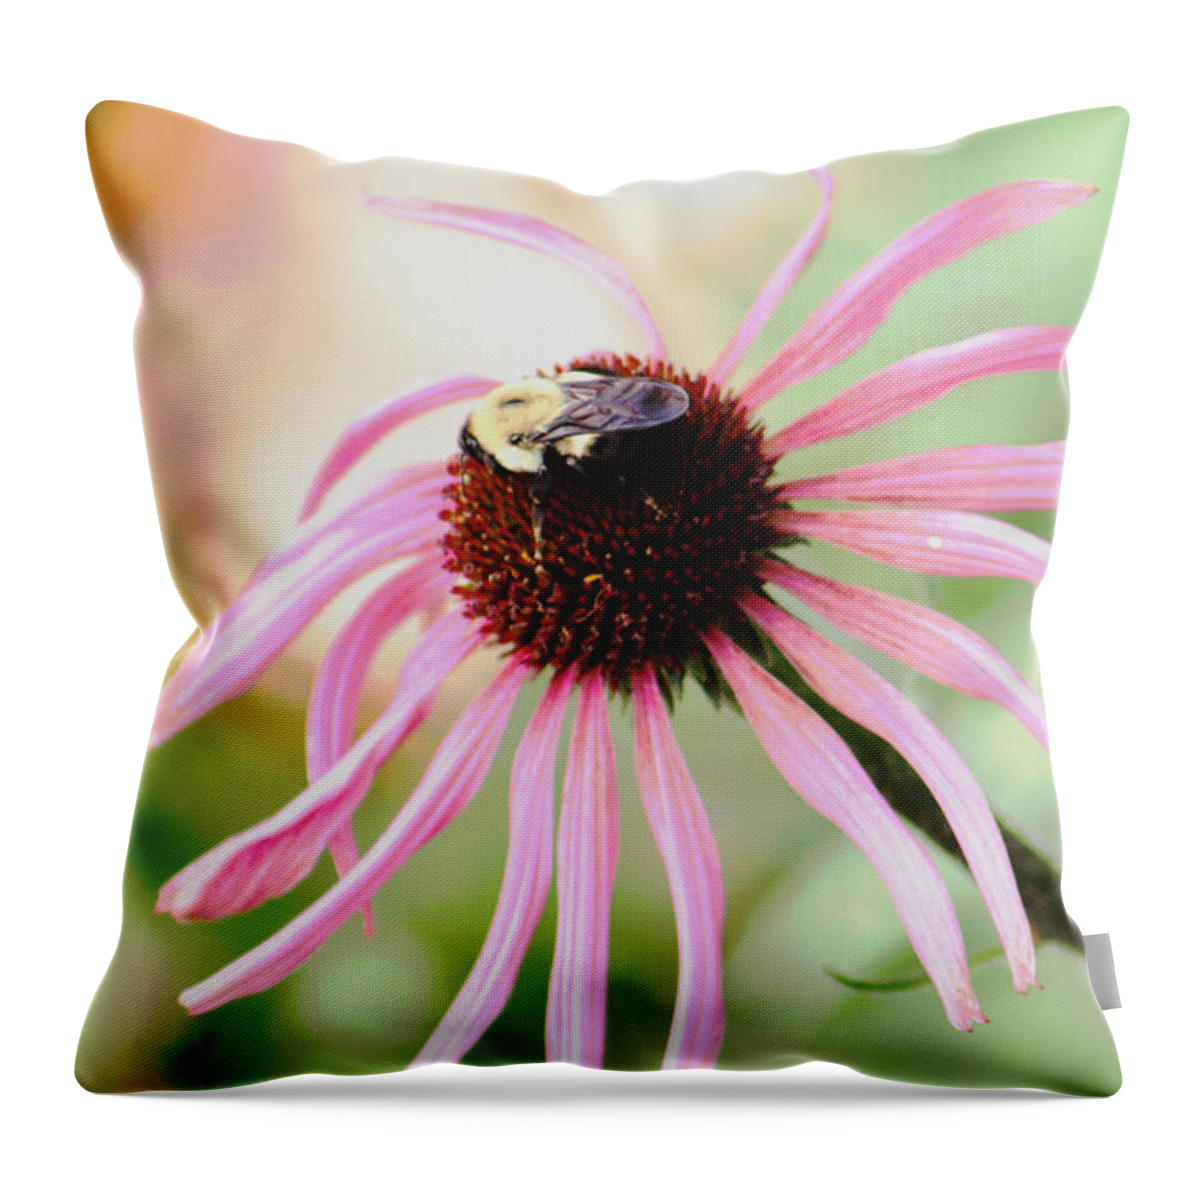 Flower Throw Pillow featuring the photograph The Sharing Game by Deborah Crew-Johnson